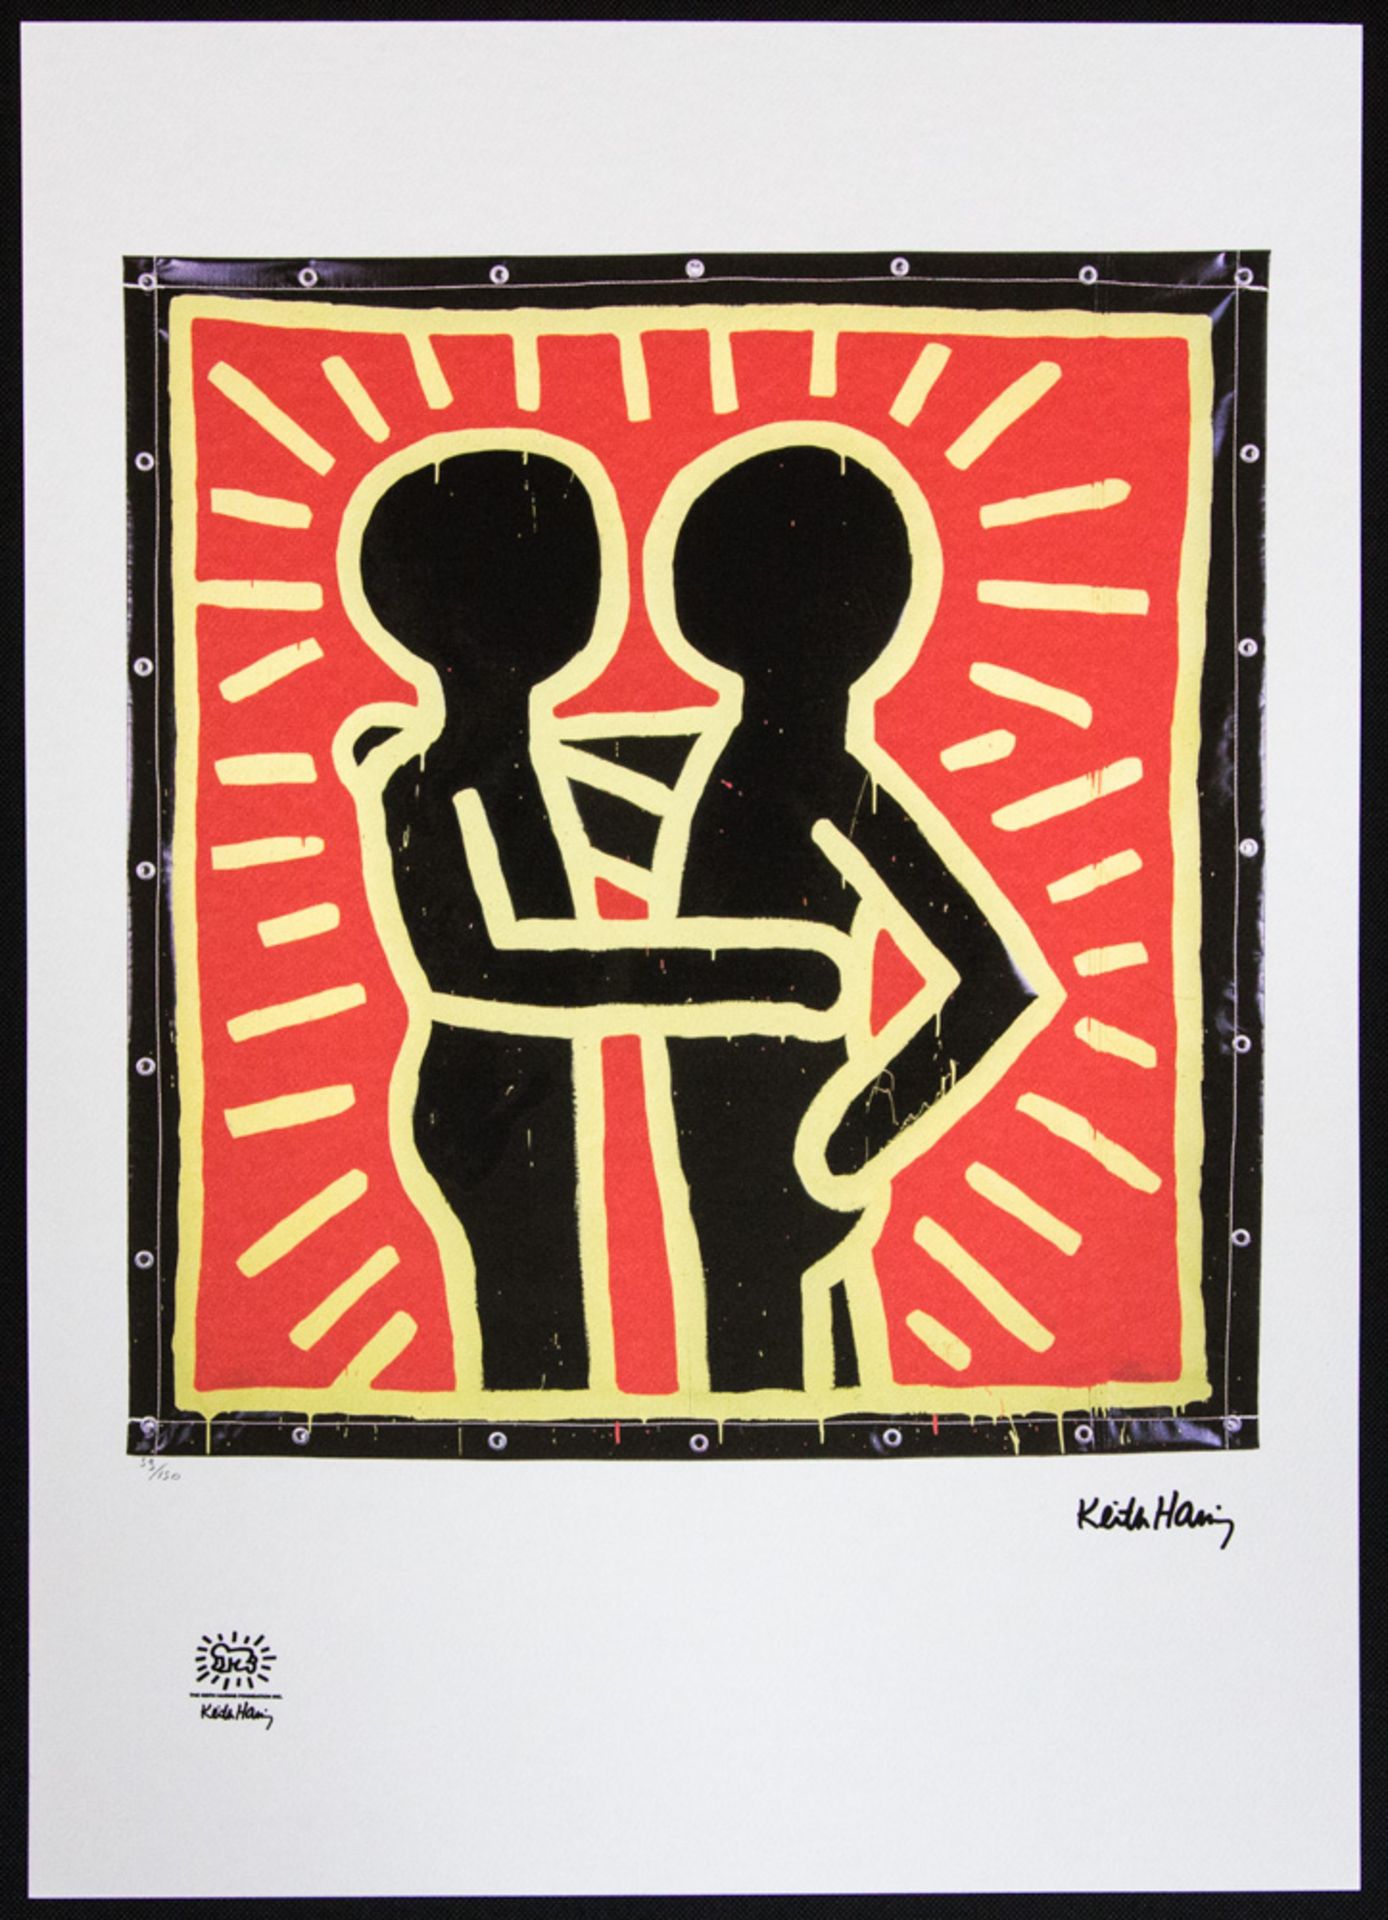 Keith Haring, Untitled - Image 2 of 6